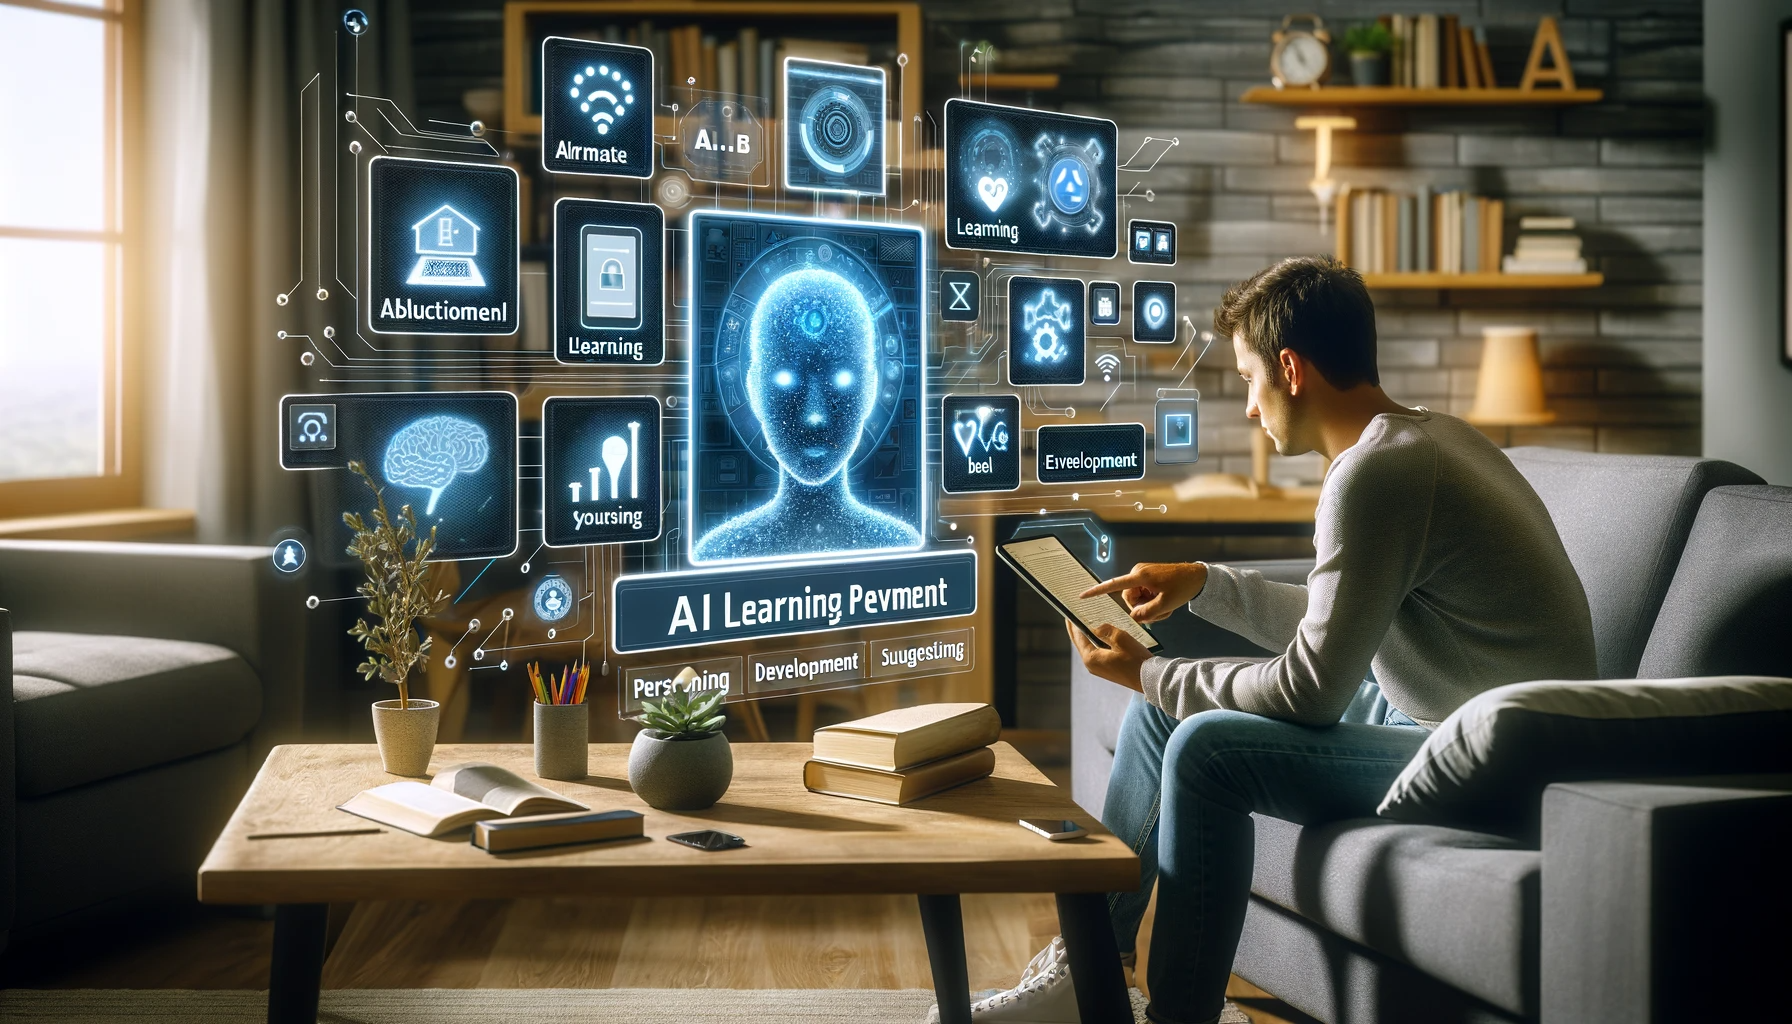 DALL·E 2024 01 18 16.26.59 An image of a person at home using AI enabled devices for personal development and learning. The individual is interacting with a smart display showin